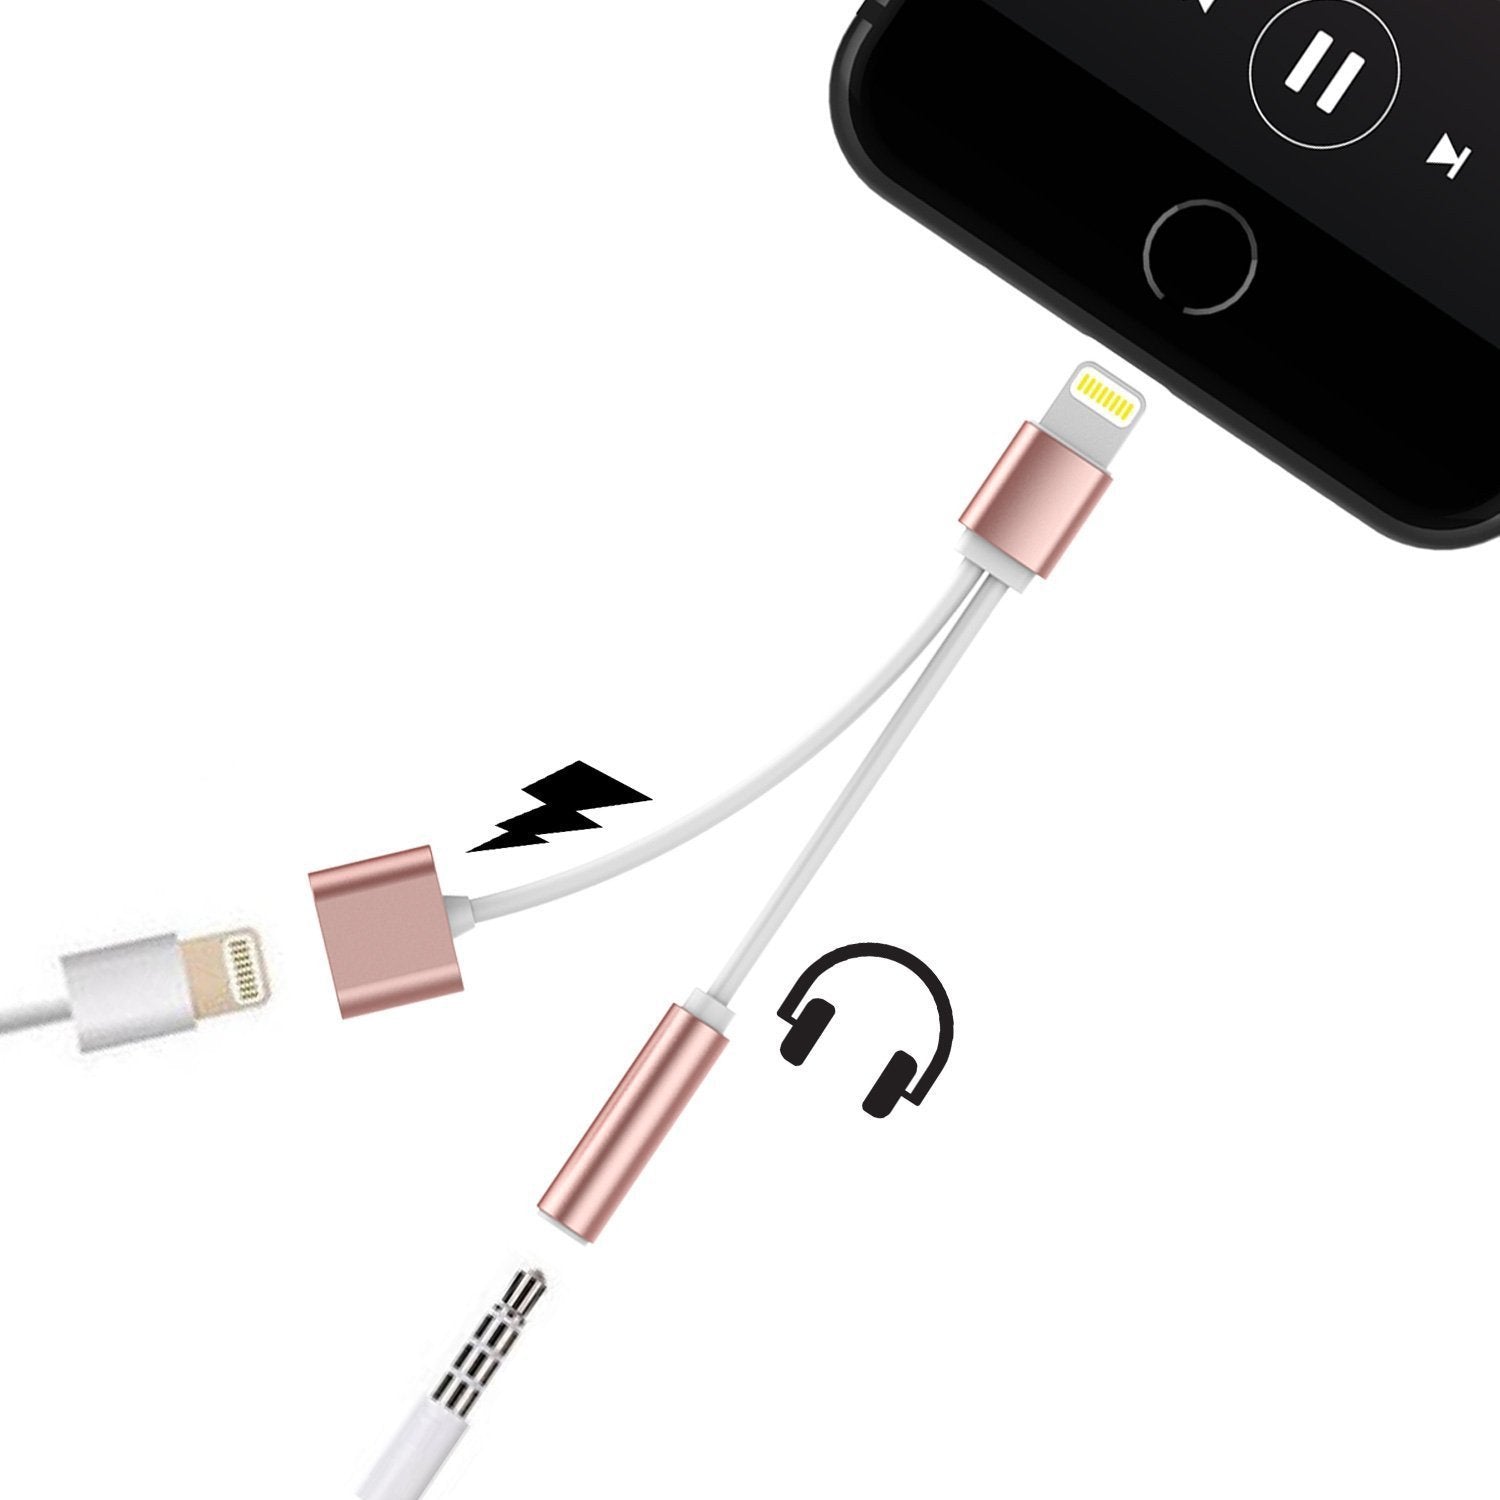 Punkzap Adapter Cable 2 in1 Splitter Charger W/Earphone iphone x/8/7